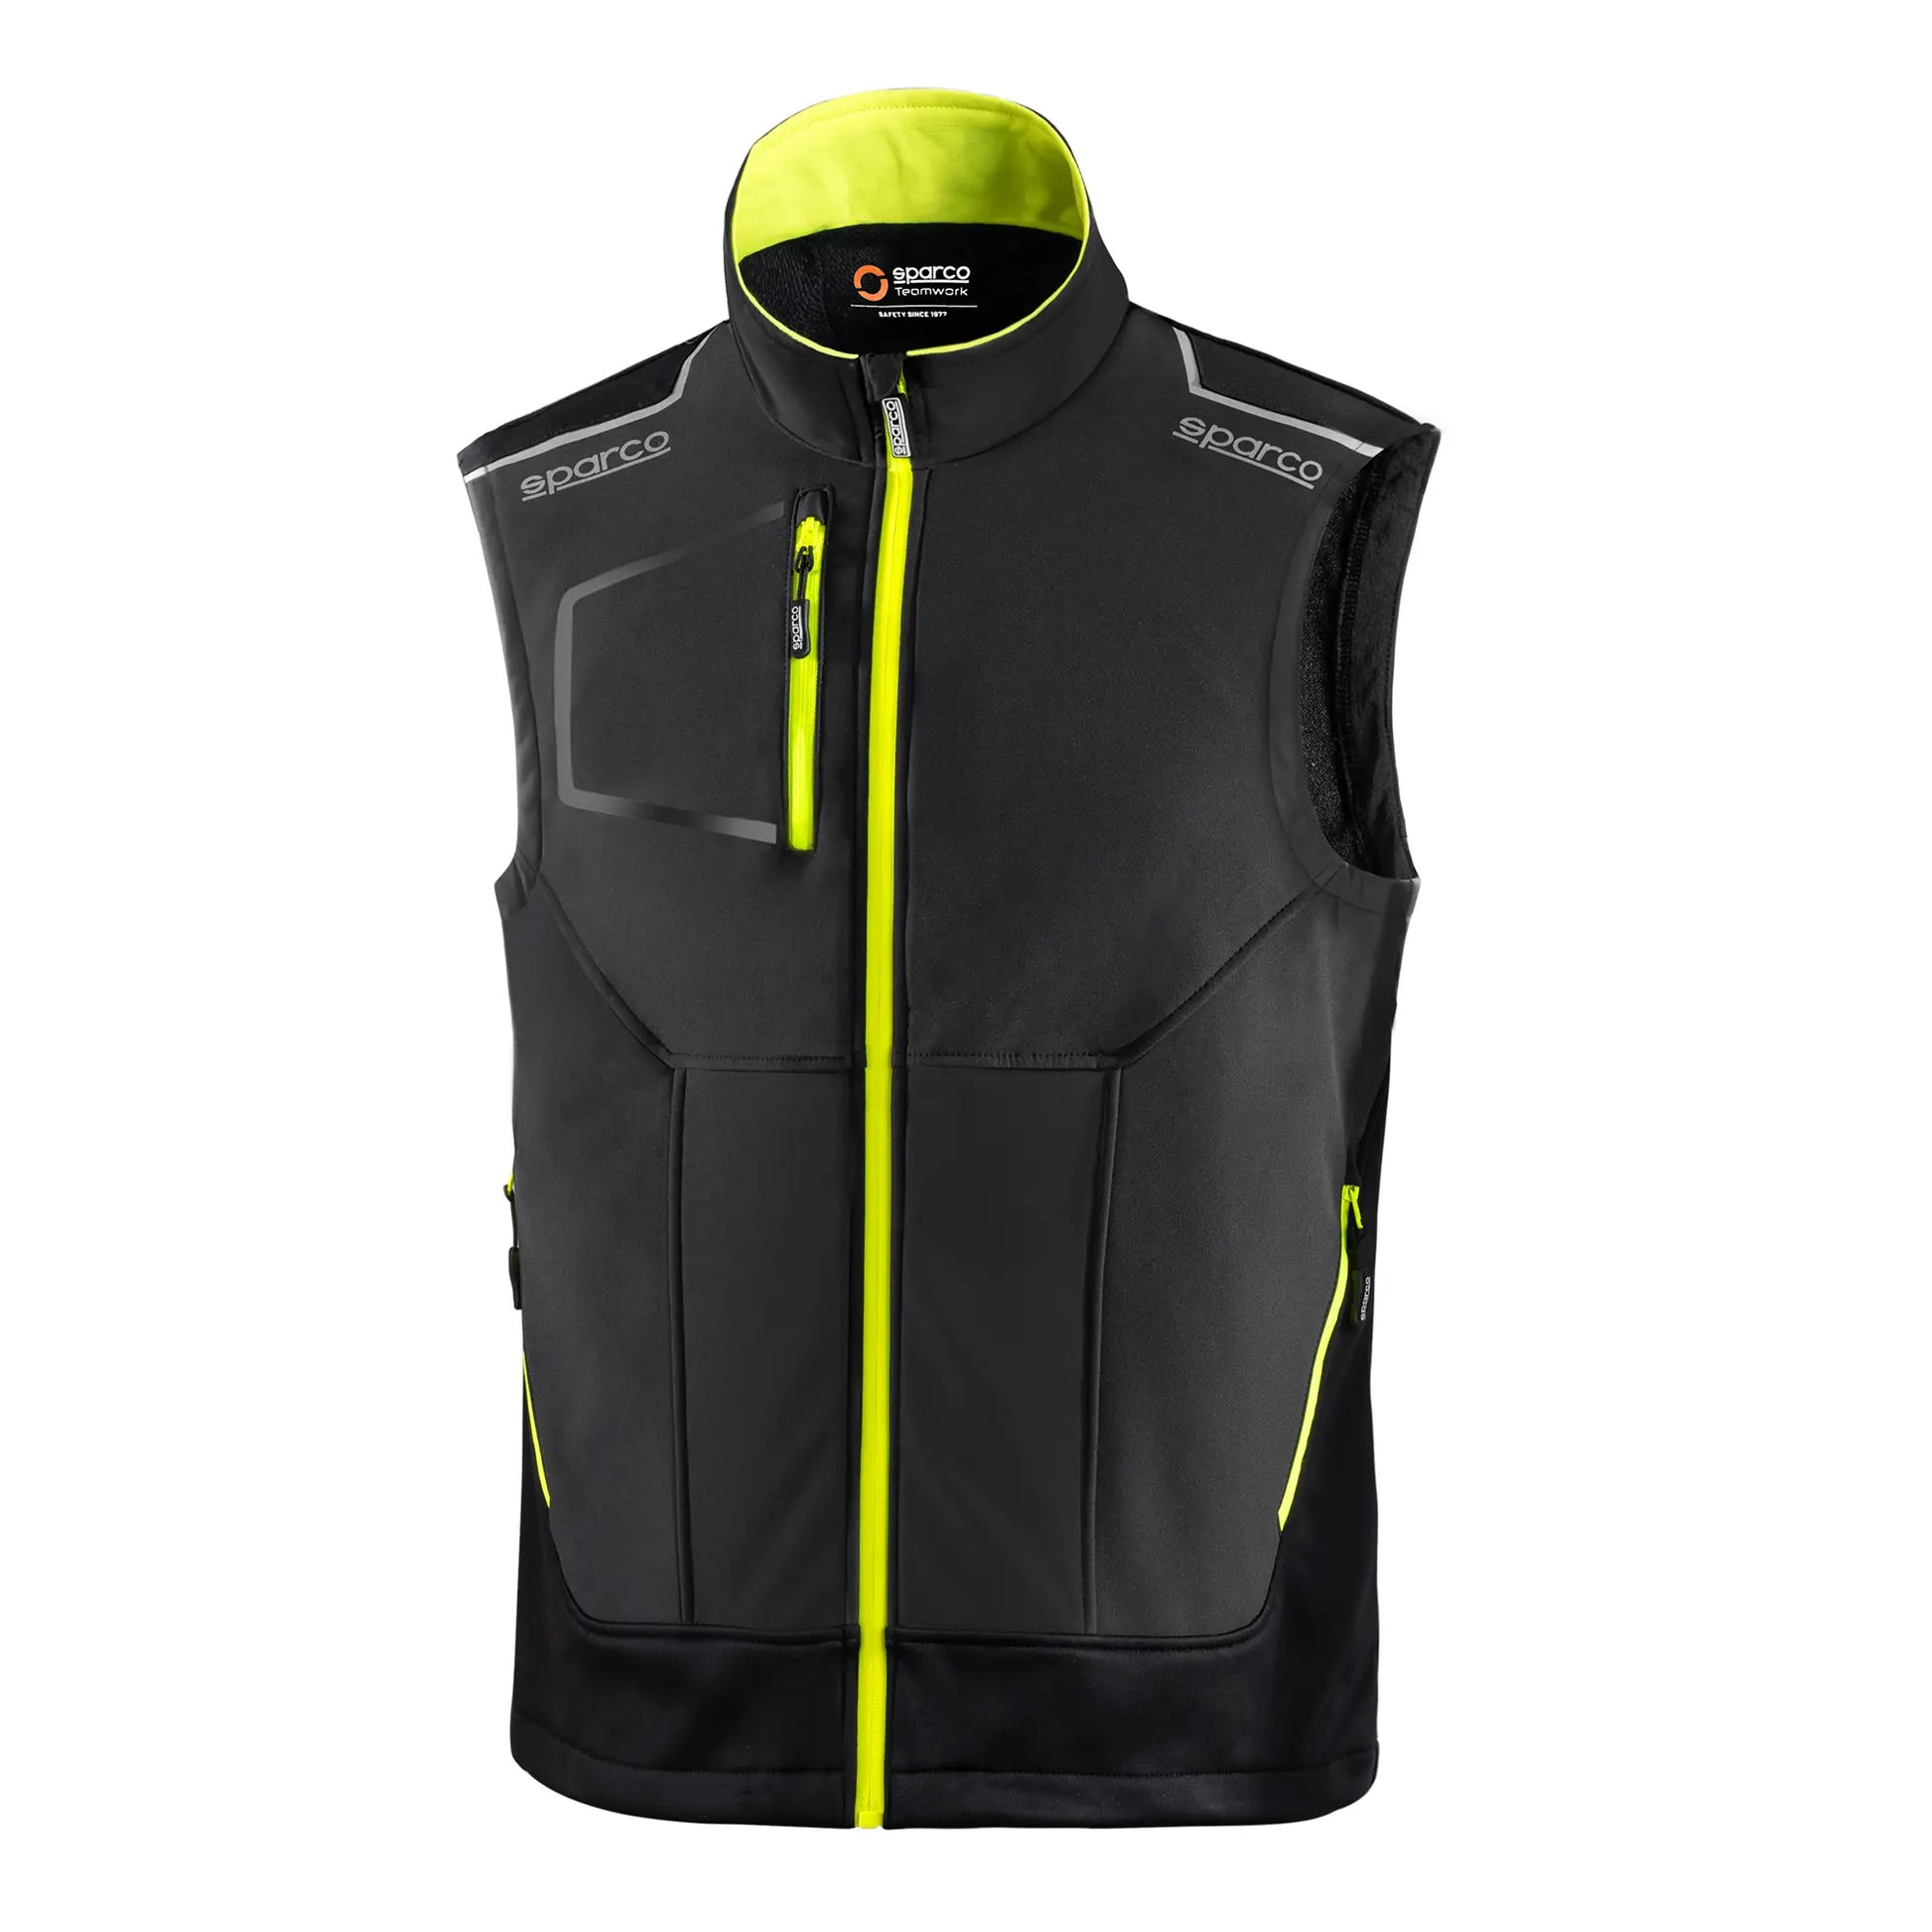 Gilet Sparco ndis